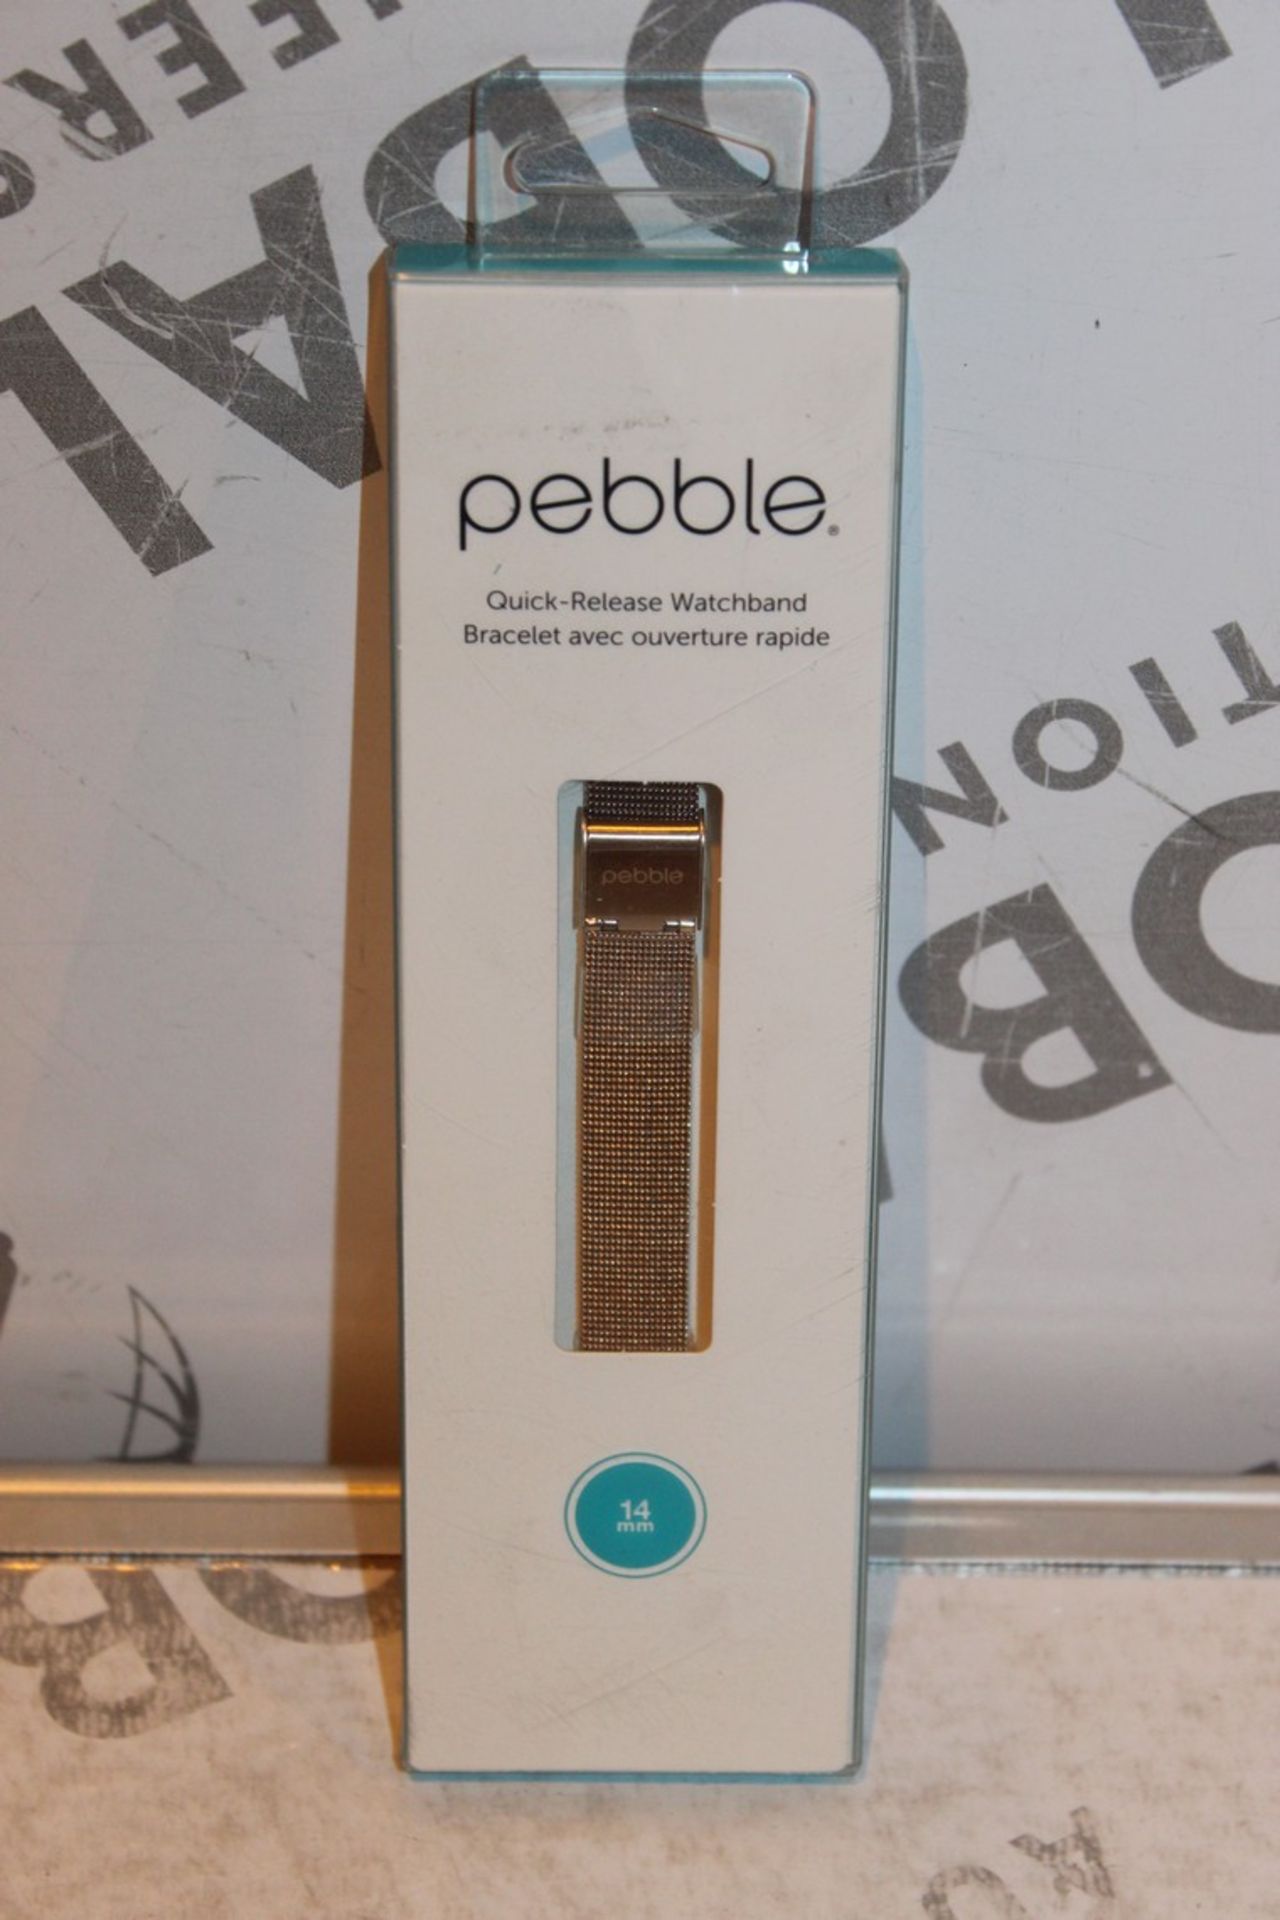 Lot to contain 5 Brand New Quick Release Pebble Gold Bracelet Watch Bands RRP £125